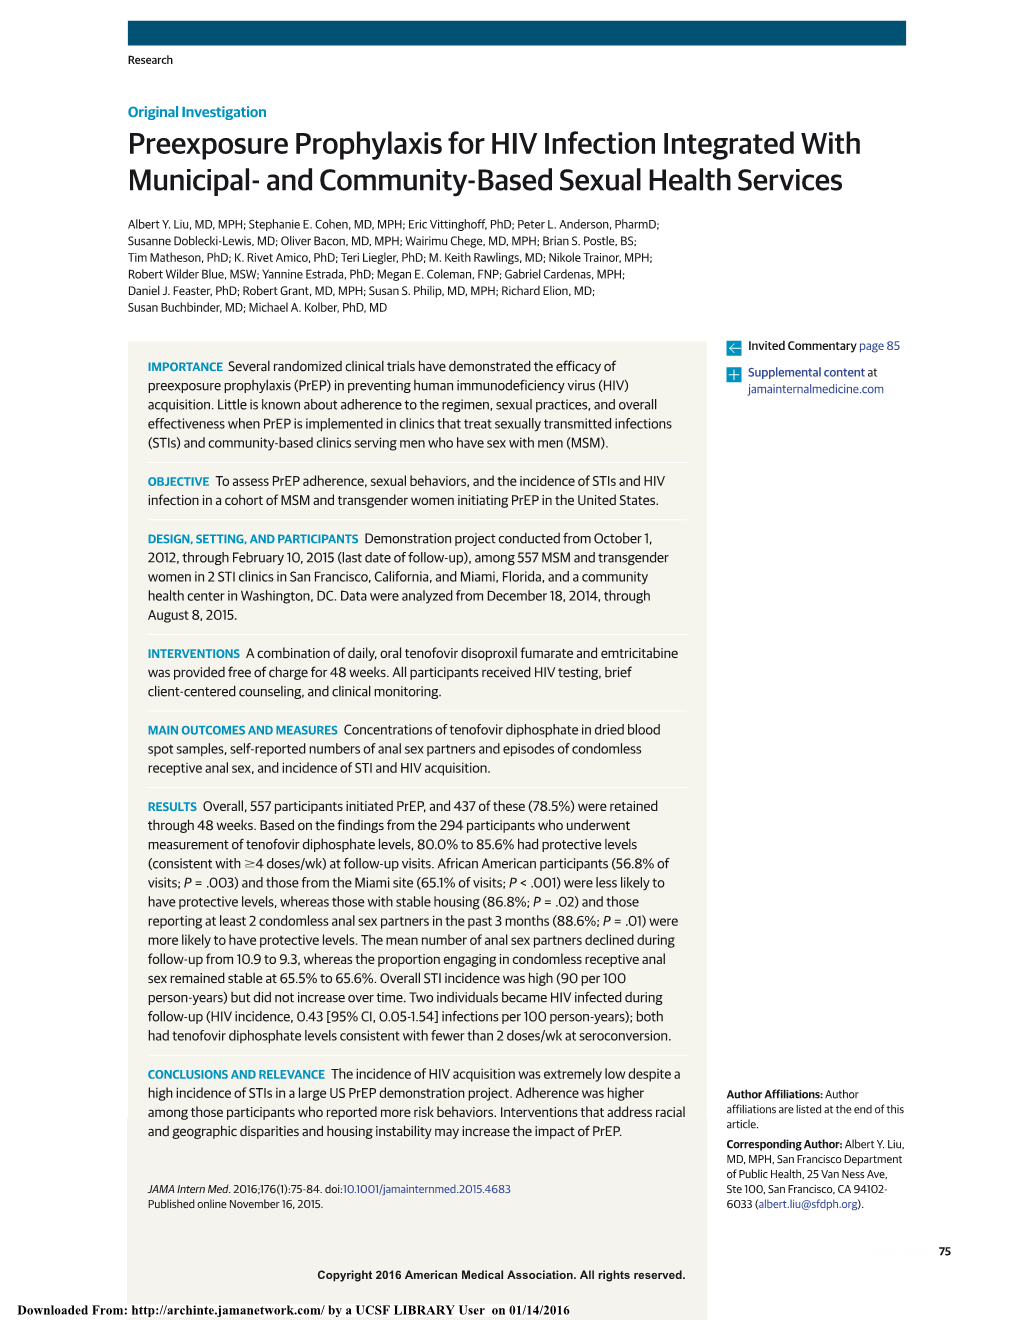 Preexposure Prophylaxis for HIV Infection Integrated with Municipal- and Community-Based Sexual Health Services